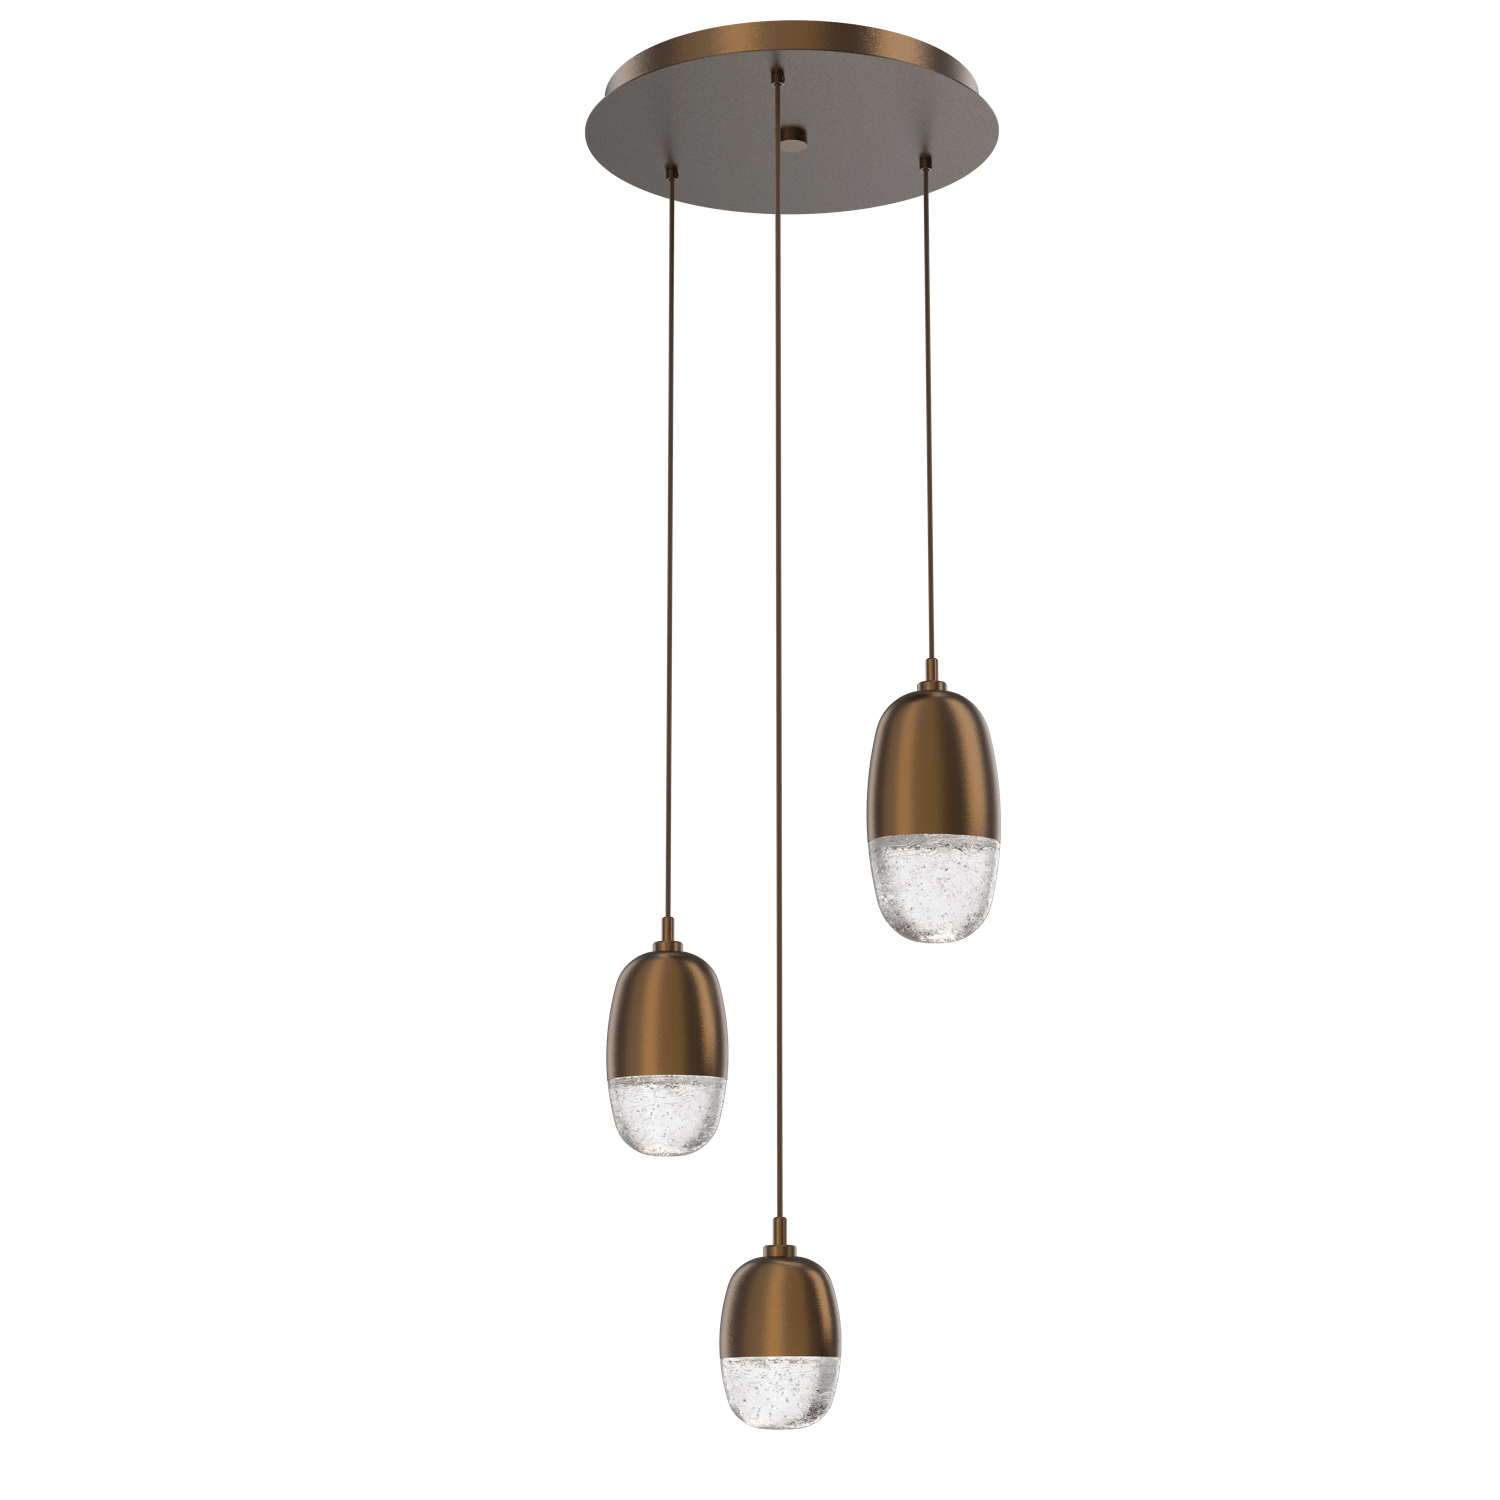 CHB0079-03-FB-Hammerton-Studio-Pebble-3-light-round-pendant-chandelier-with-flat-bronze-finish-and-clear-cast-glass-shades-and-LED-lamping